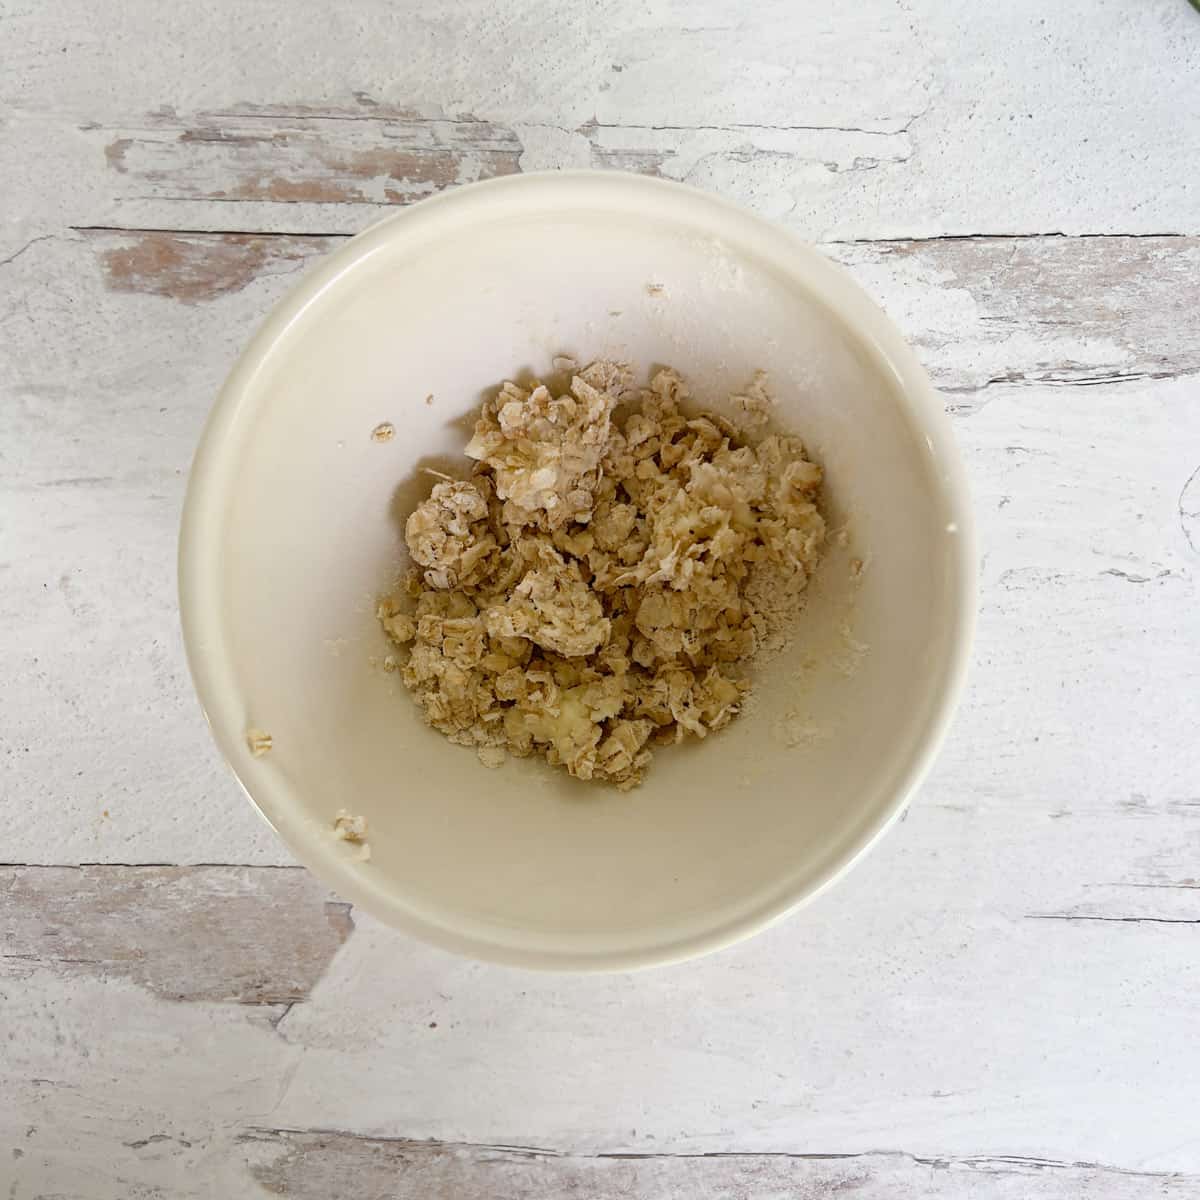 Rolled oats, butter, and flour mixed together in bowl.